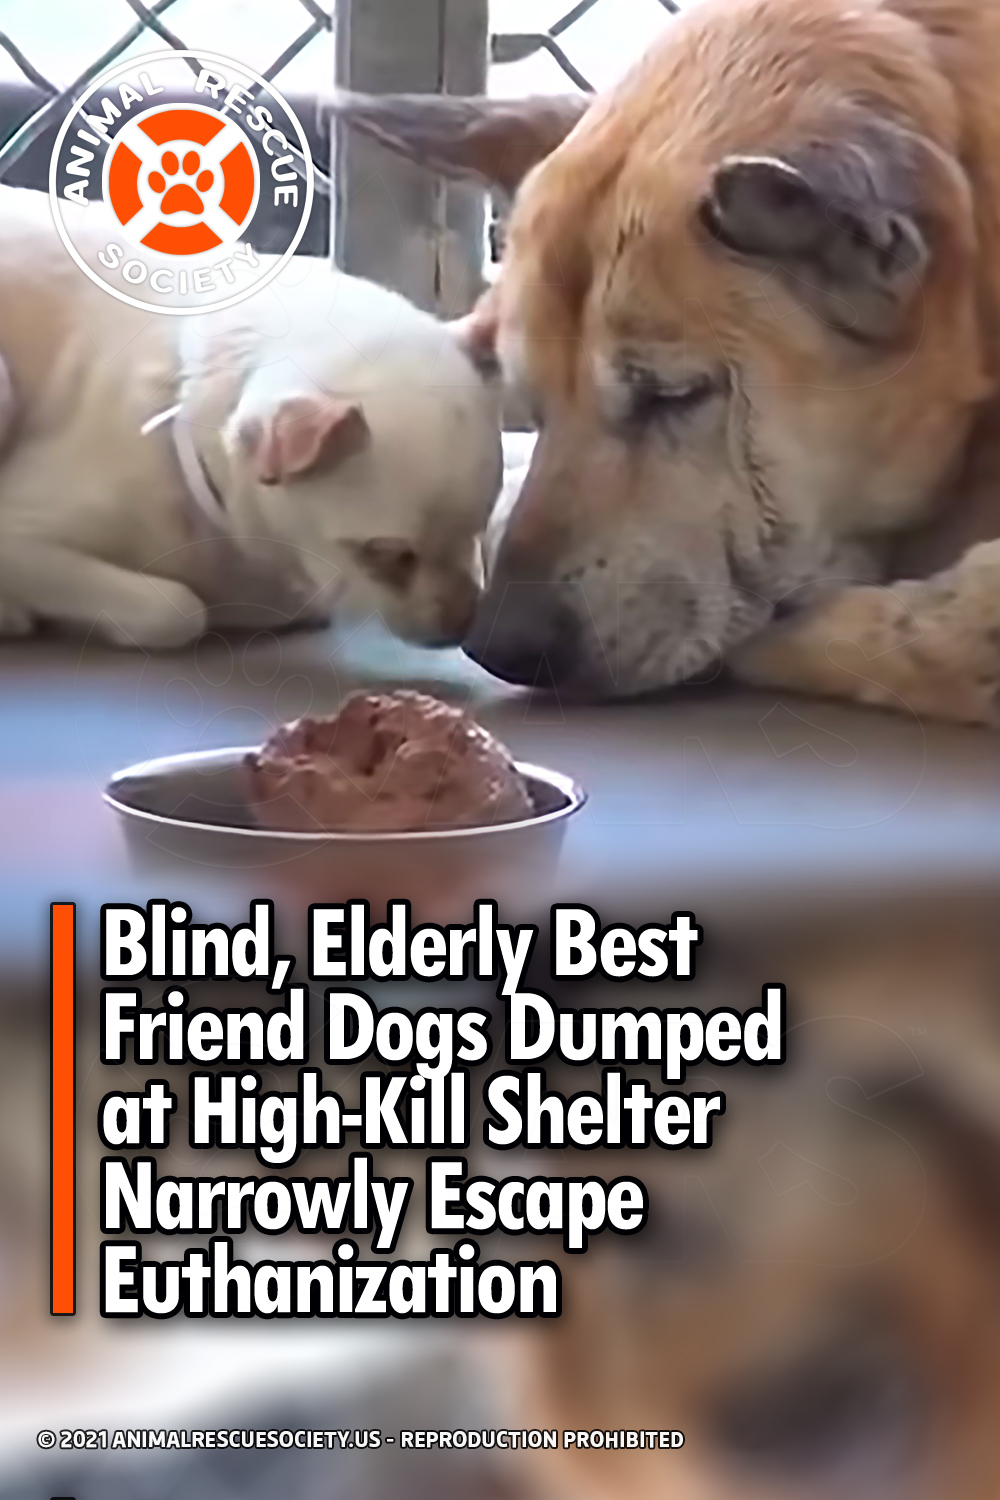 Blind, Elderly Best Friend Dogs Dumped at High-Kill Shelter Narrowly Escape Euthanization